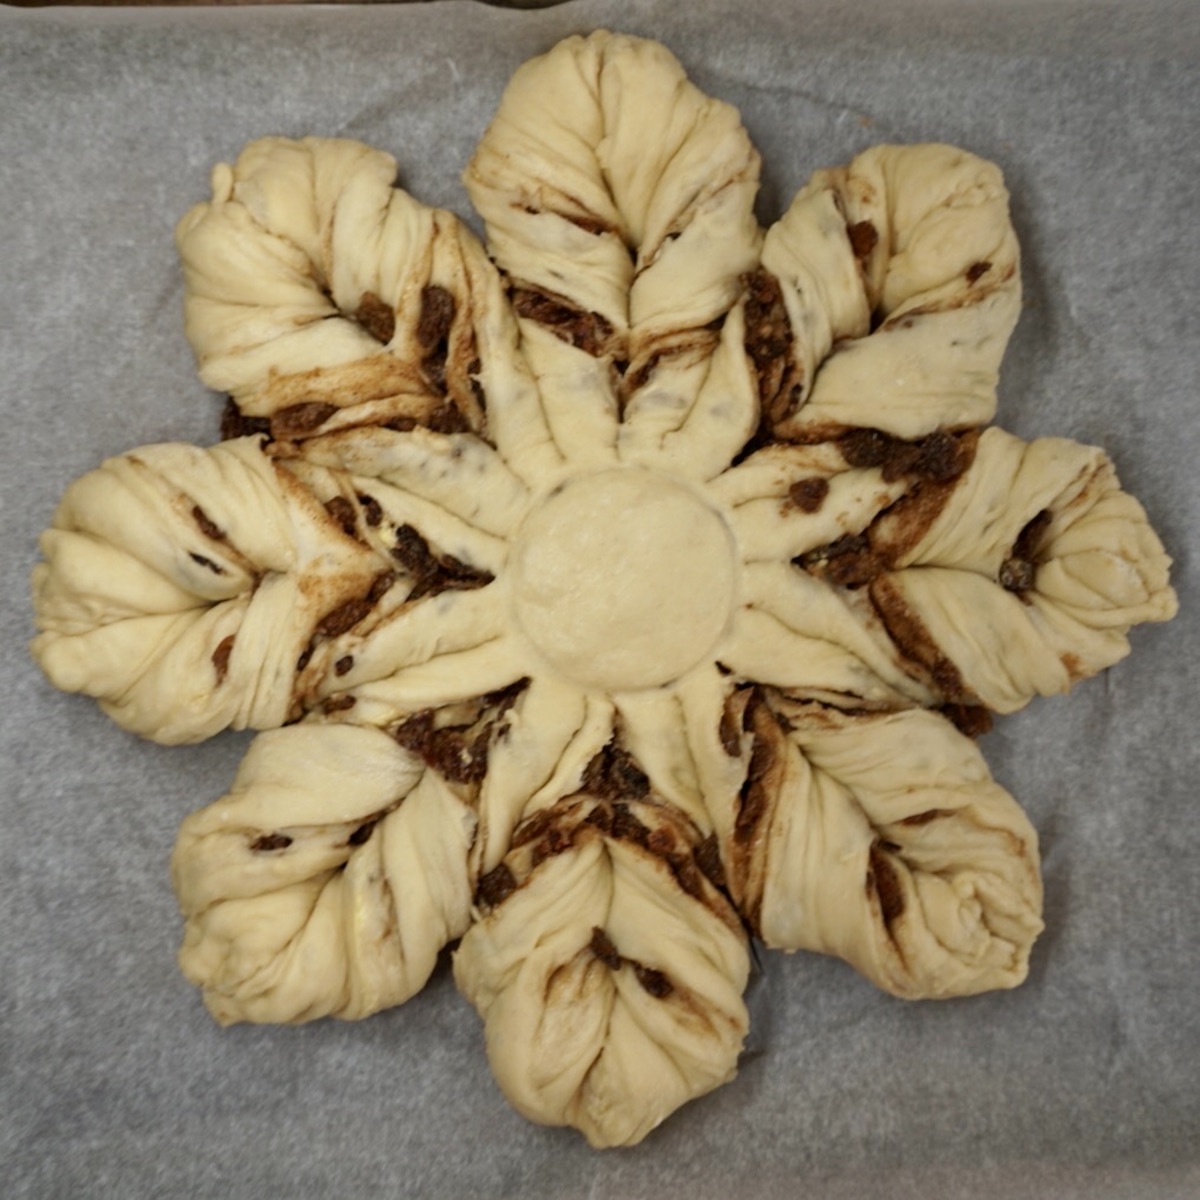 Unbaked star bread.